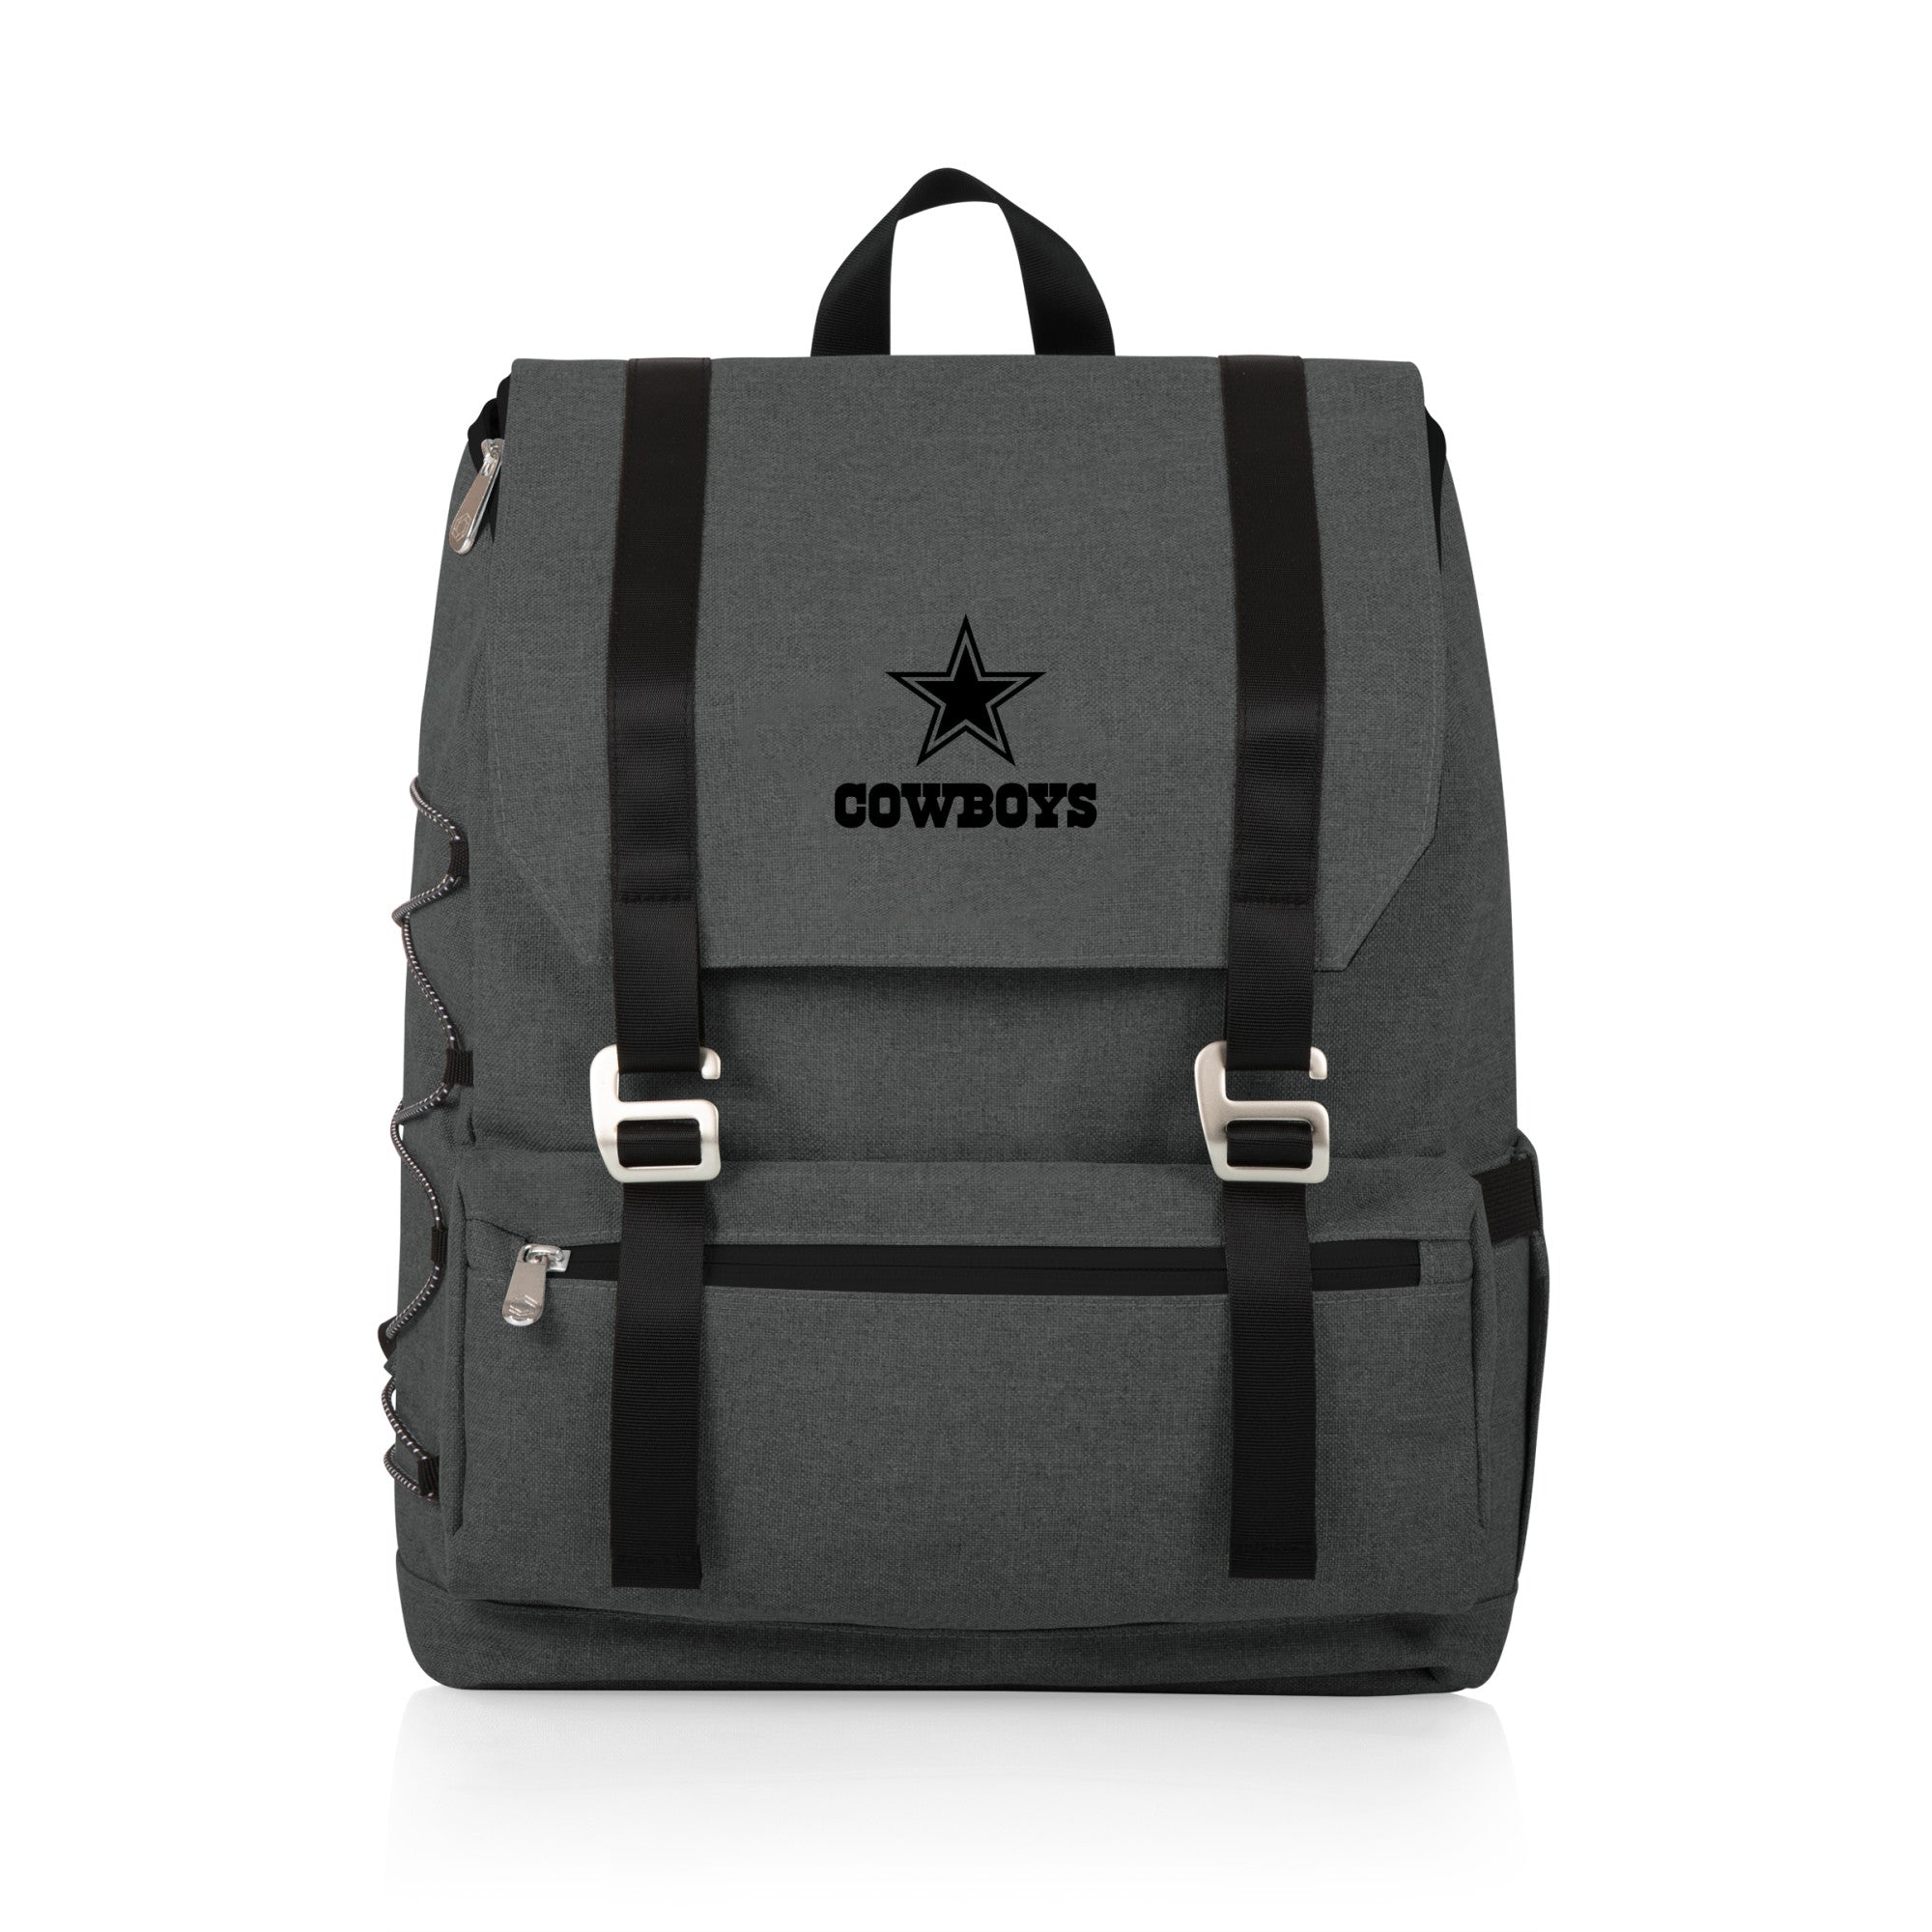 Dallas Cowboys - On The Go Traverse Backpack Cooler